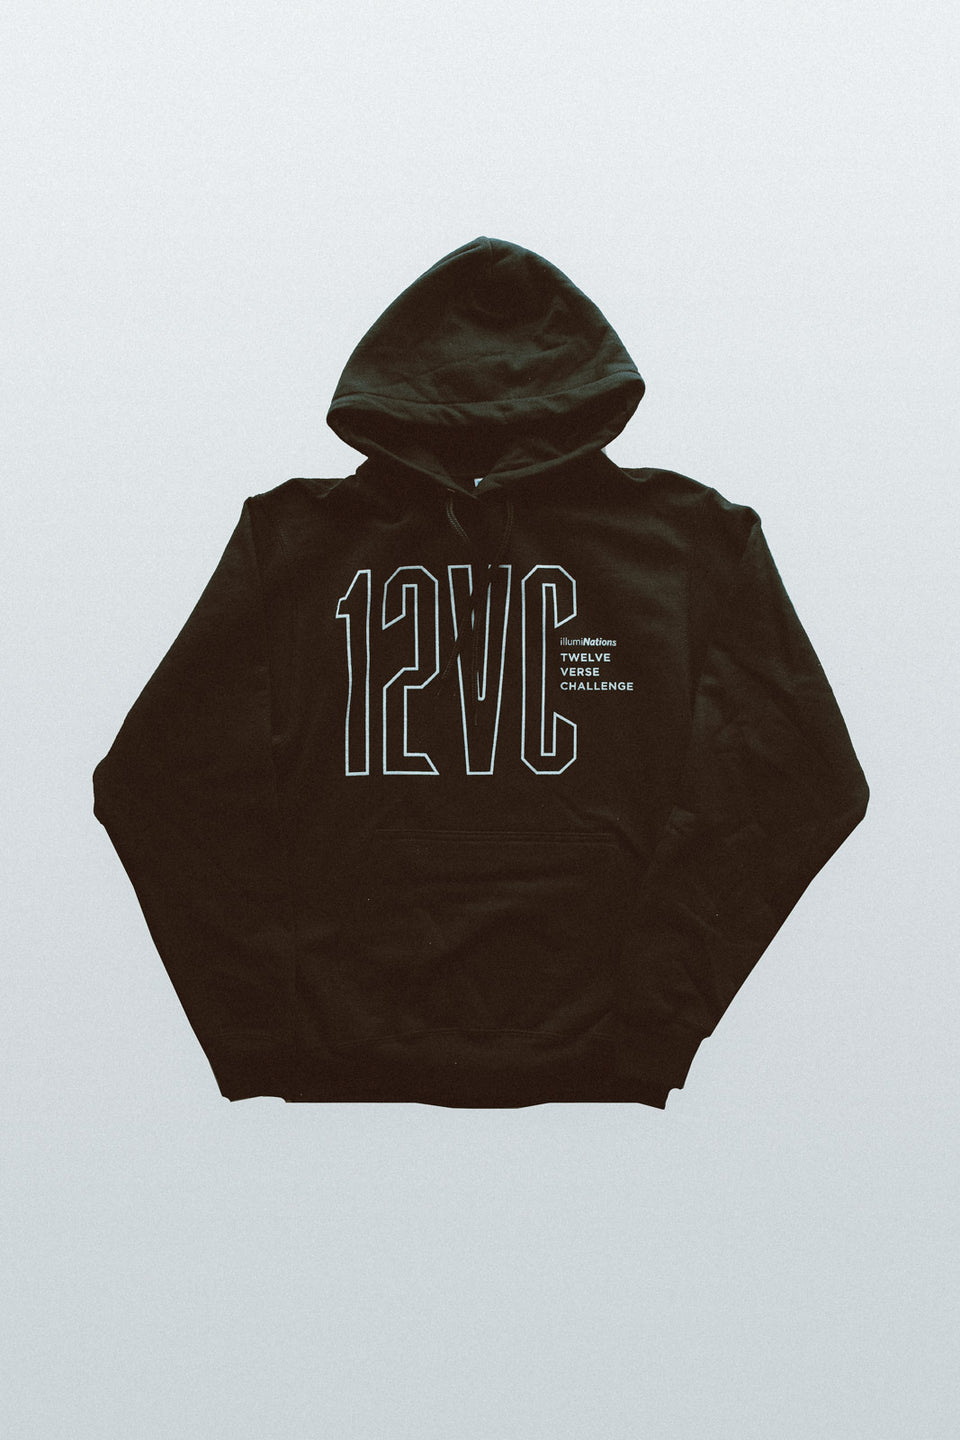 All Nations Hoodie